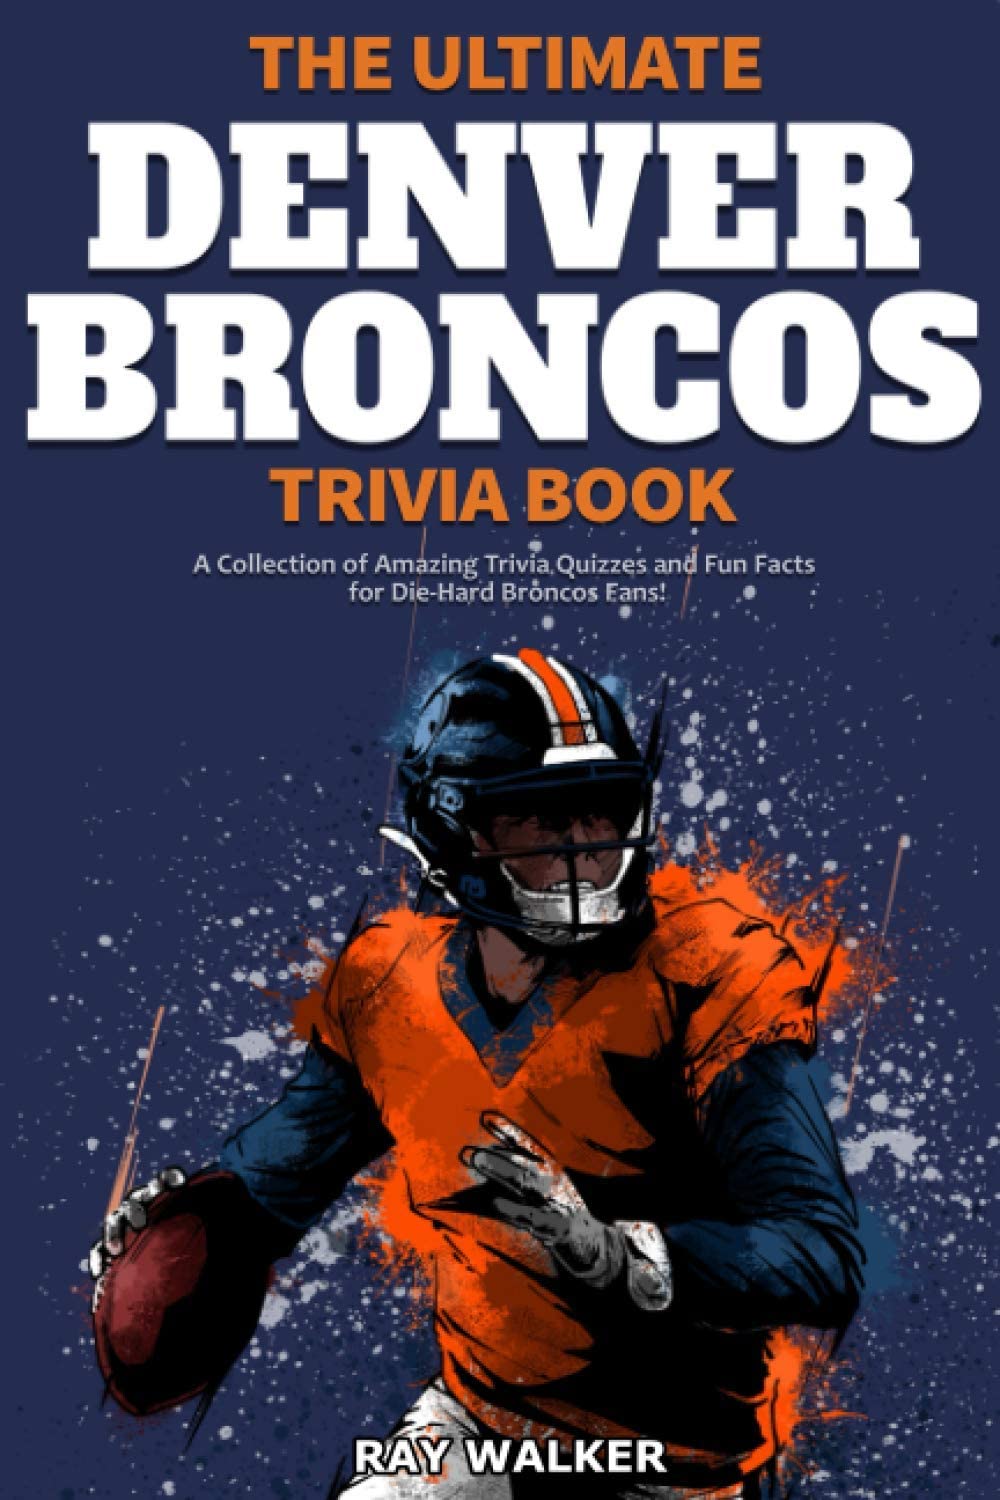 The Ultimate Denver Broncos Trivia Book: A Collection of Amazing Trivia Quizzes and Fun Facts for Die-Hard Broncos Fans!